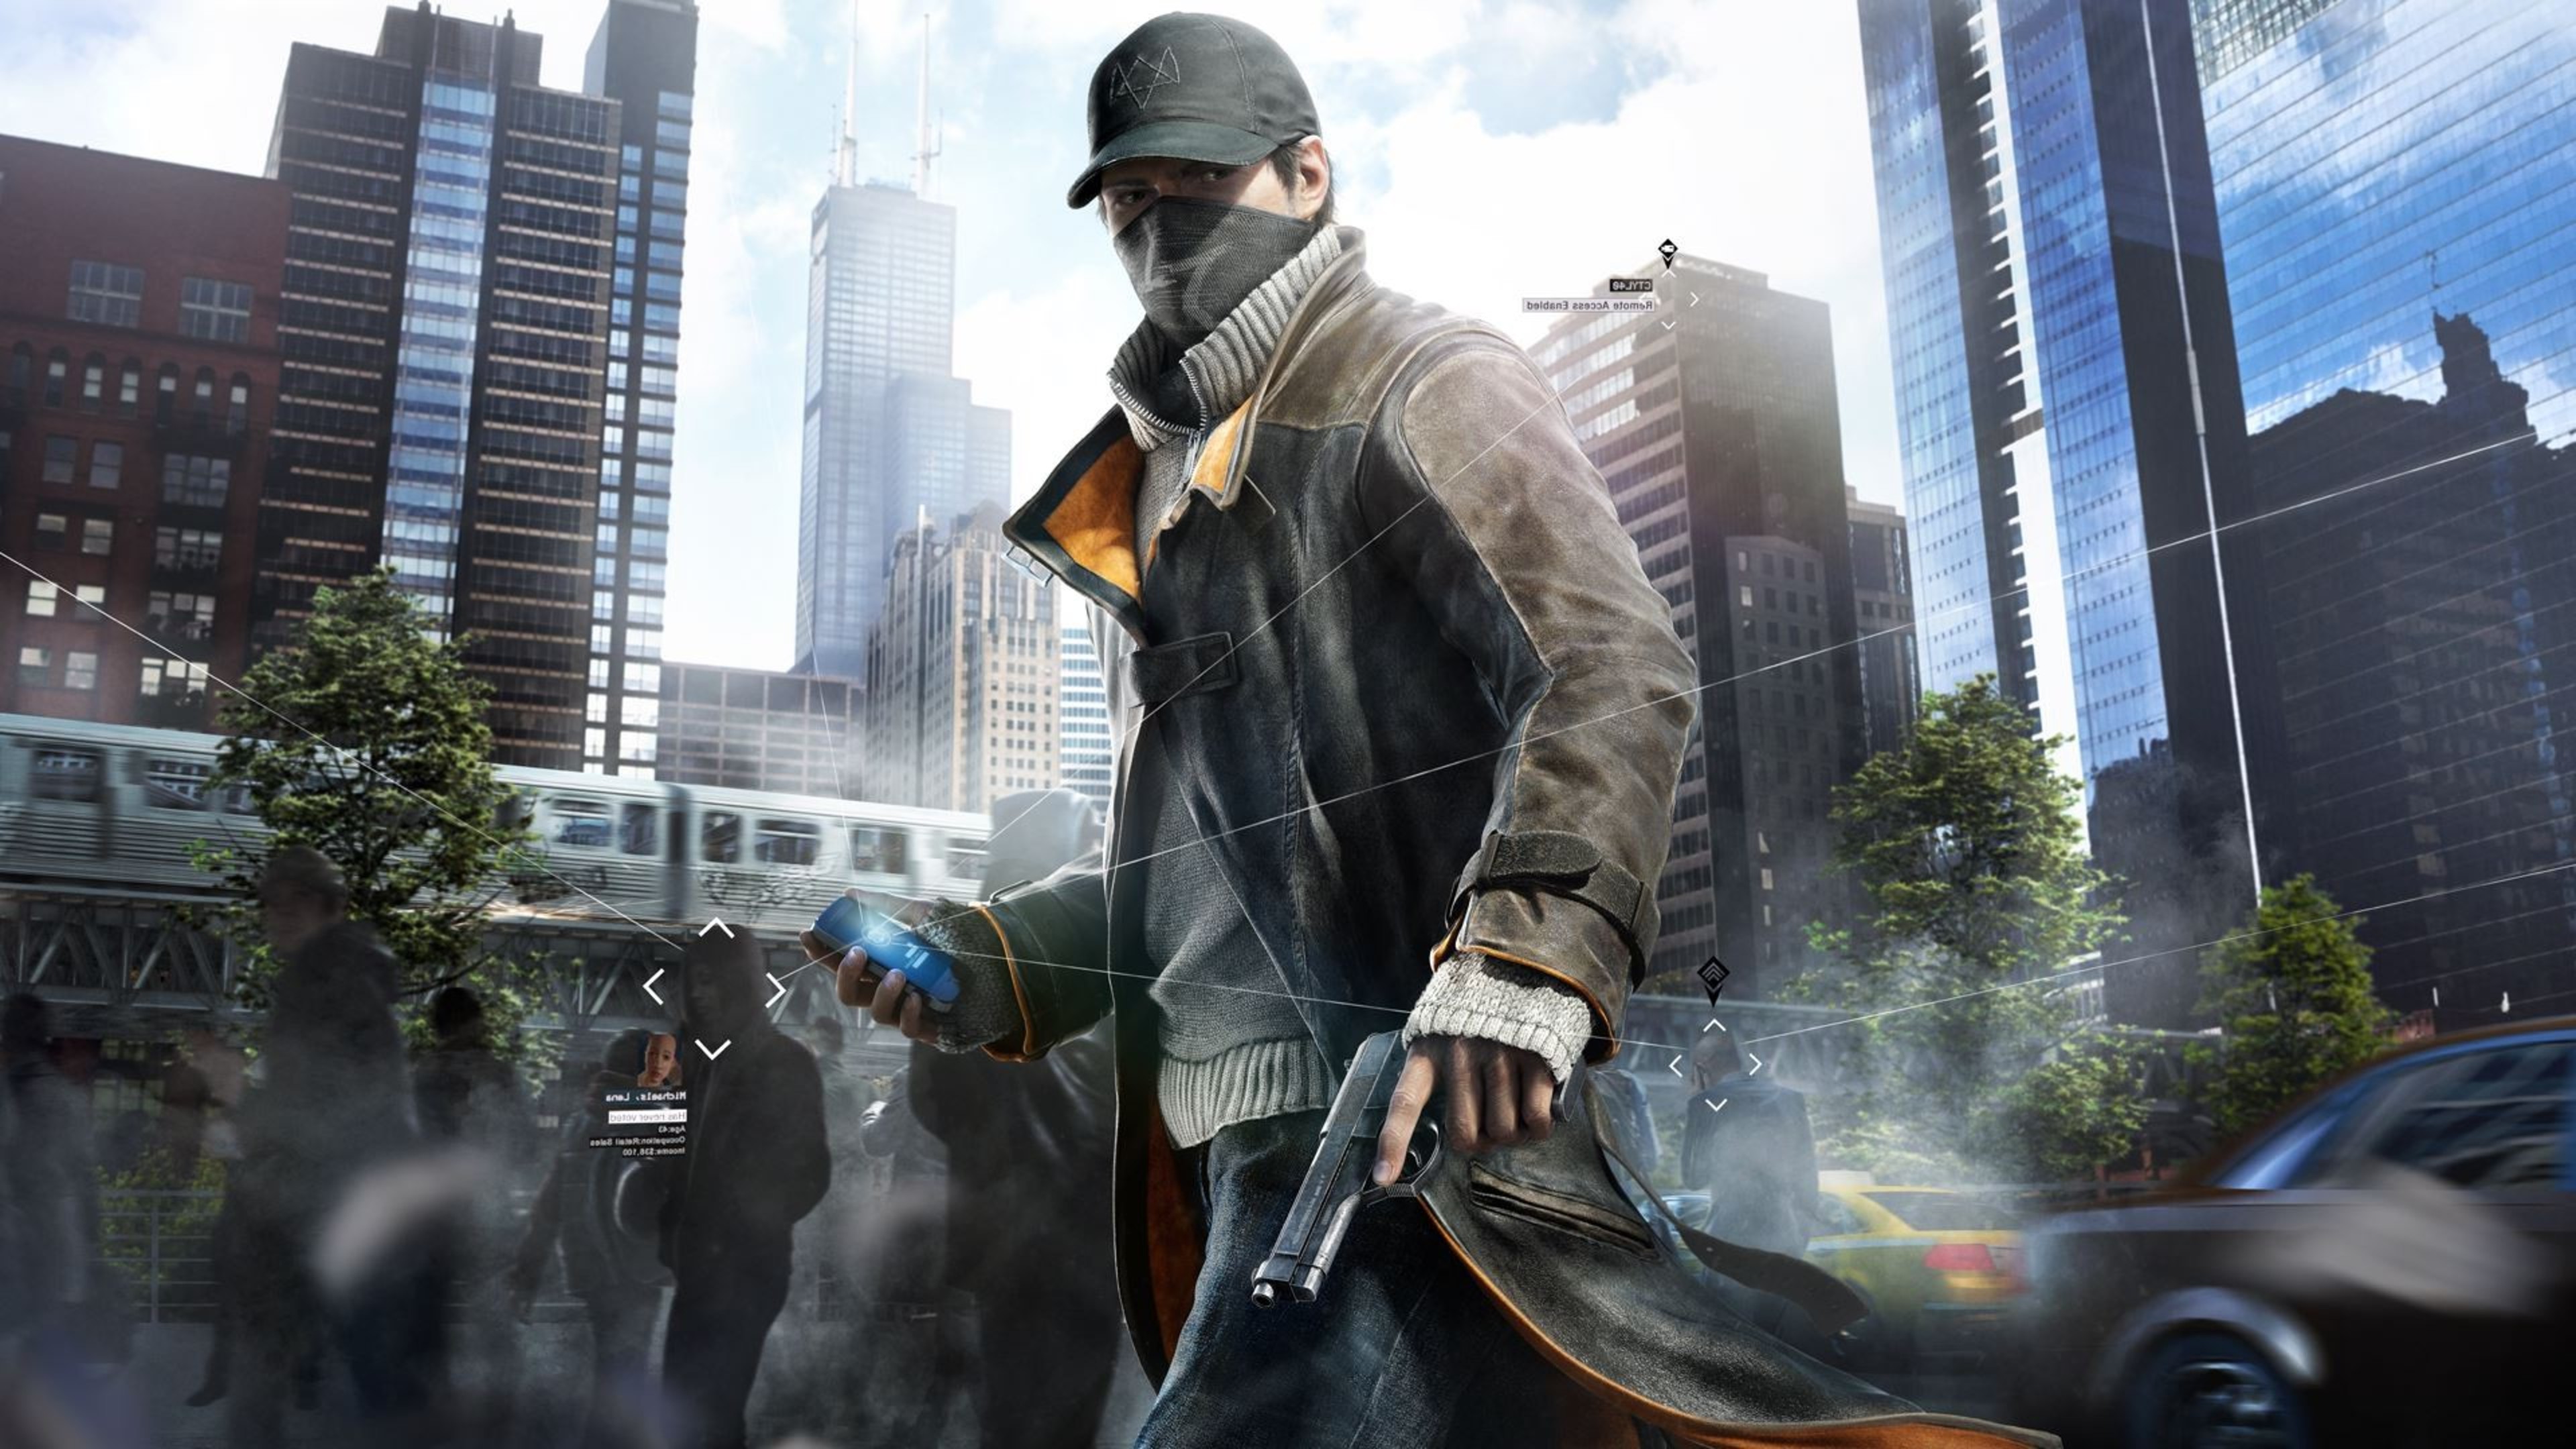 Wallpaper 4k Watch Dogs Aiden Pearce 2016 Games Wallpapers